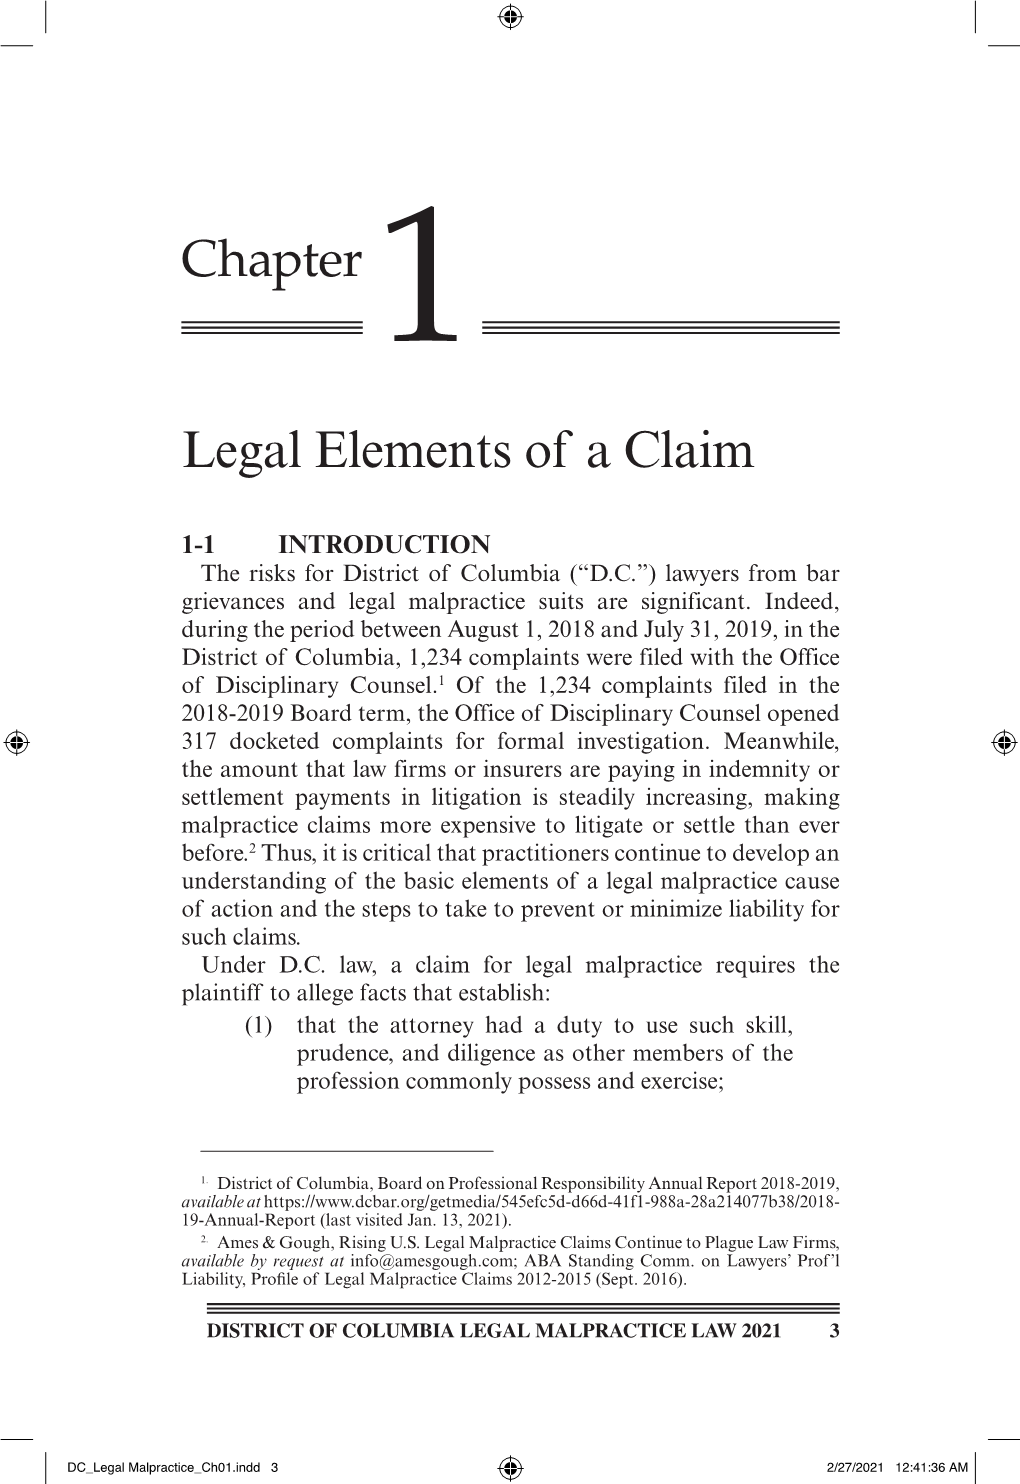 Chapter 1 Legal Elements of a Claim